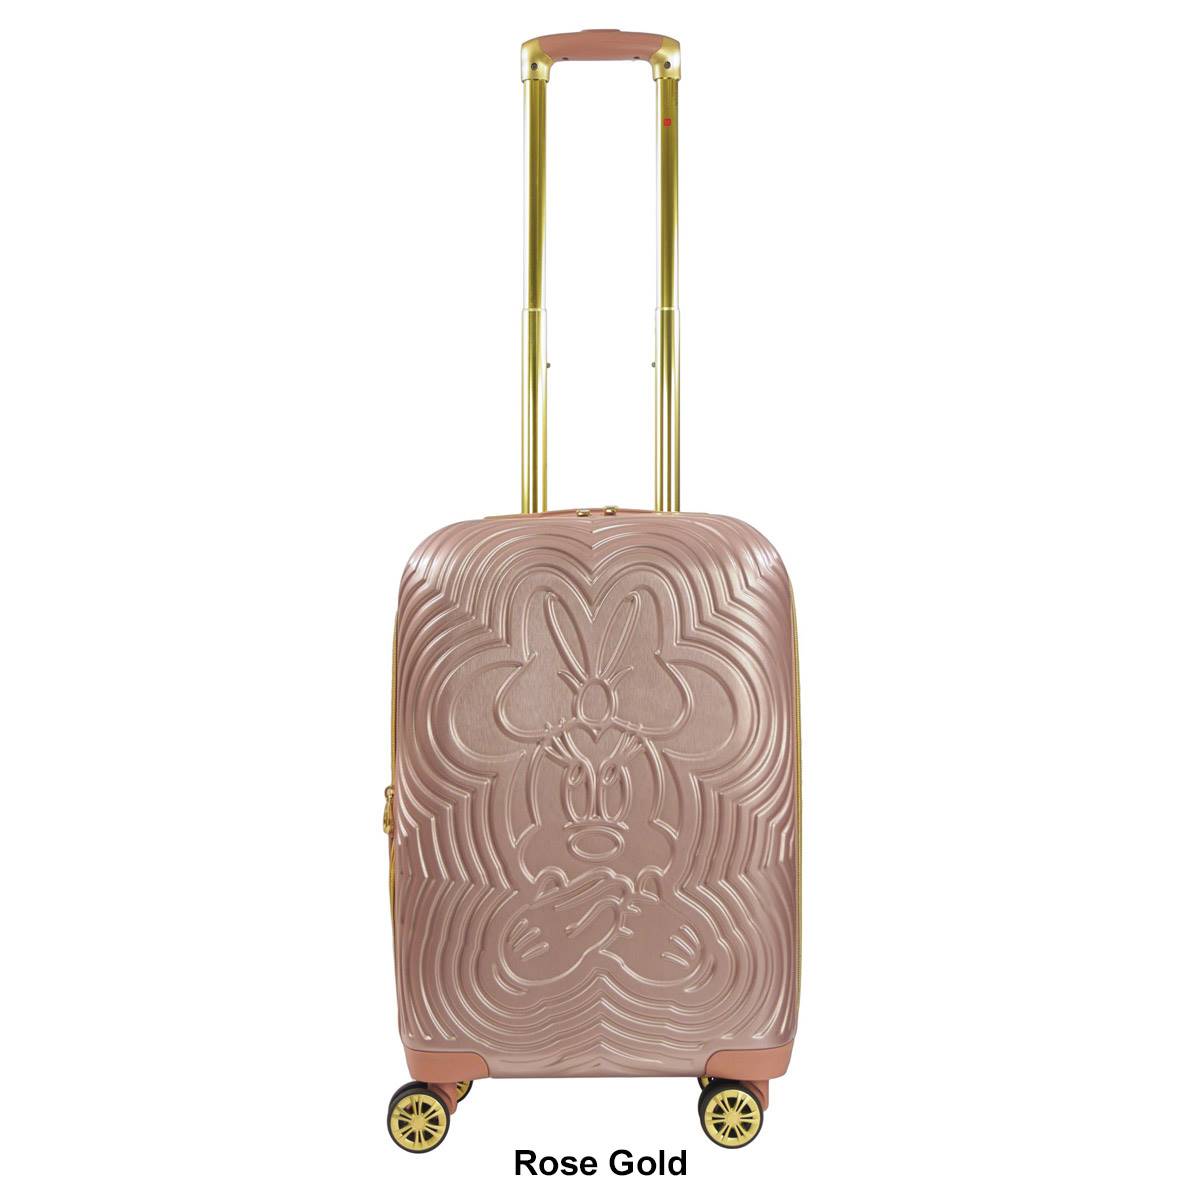 FUL Playful Minnie Mouse 21in. Hardside Carry-On Spinner Luggage